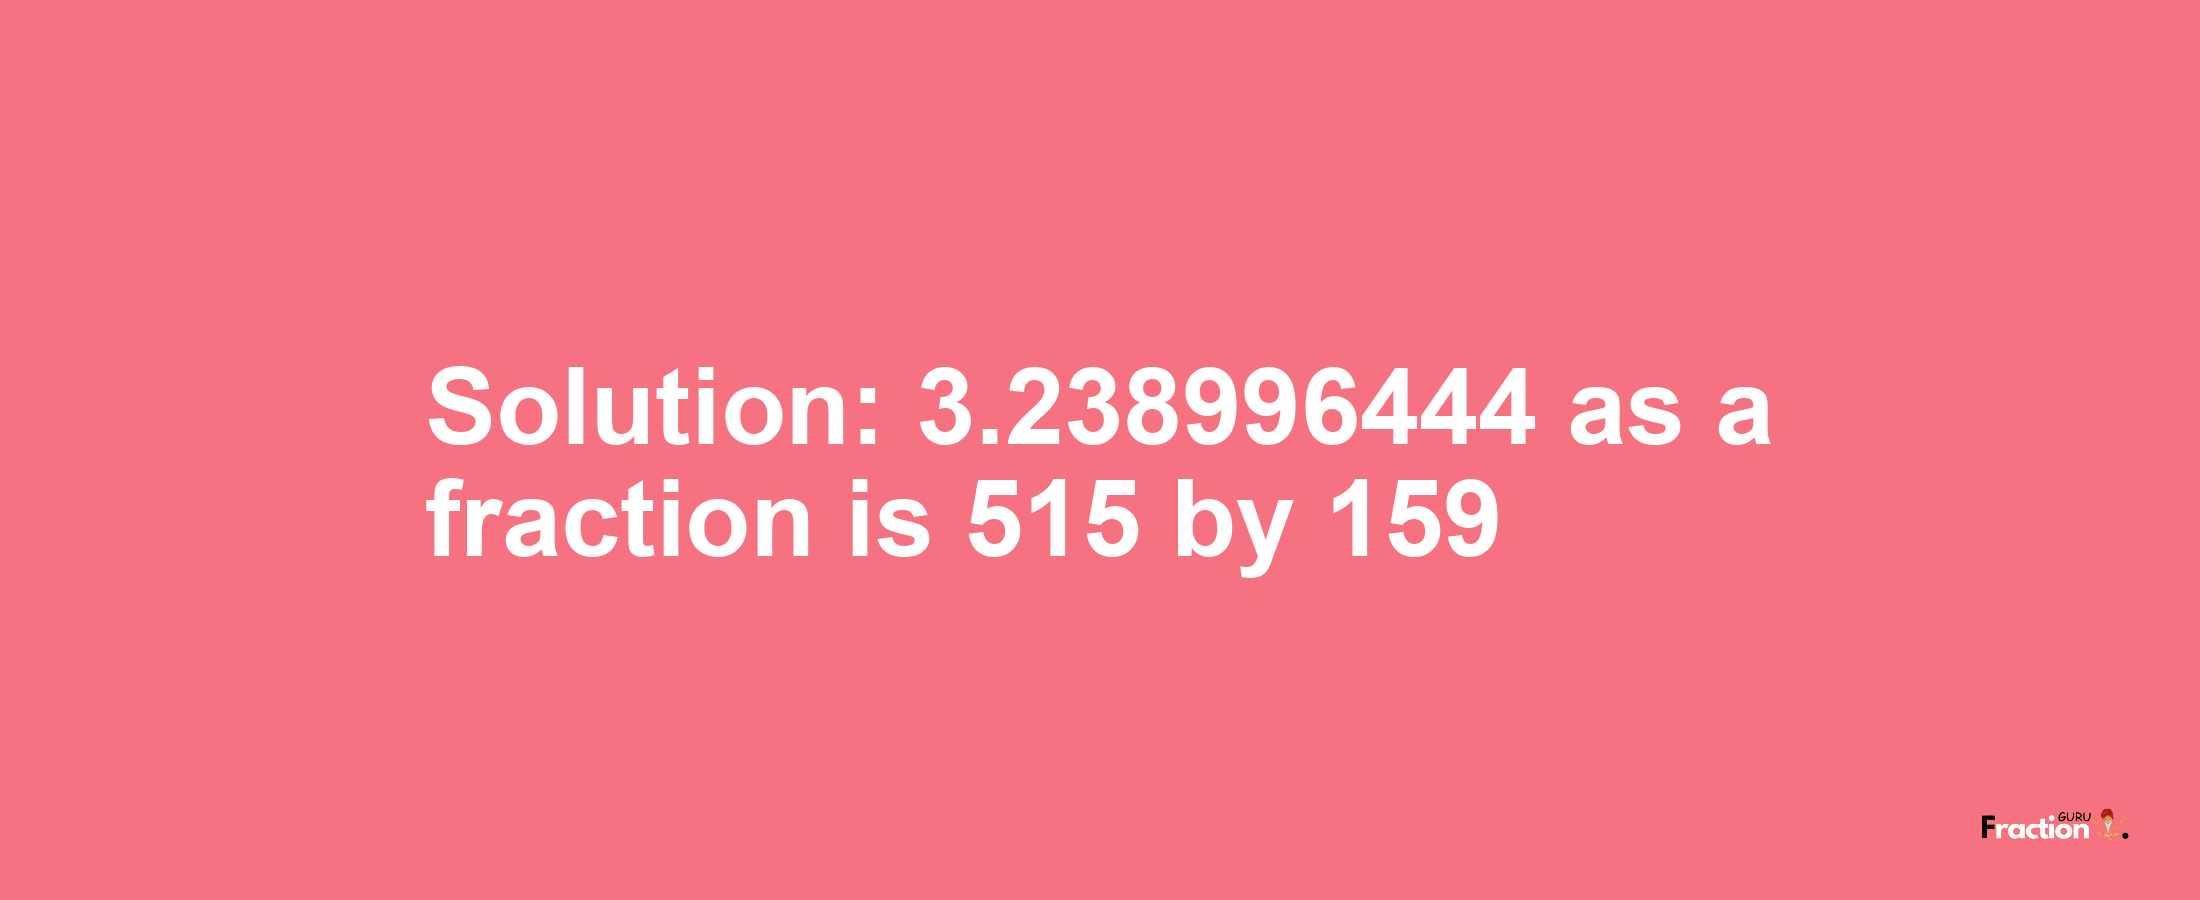 Solution:3.238996444 as a fraction is 515/159